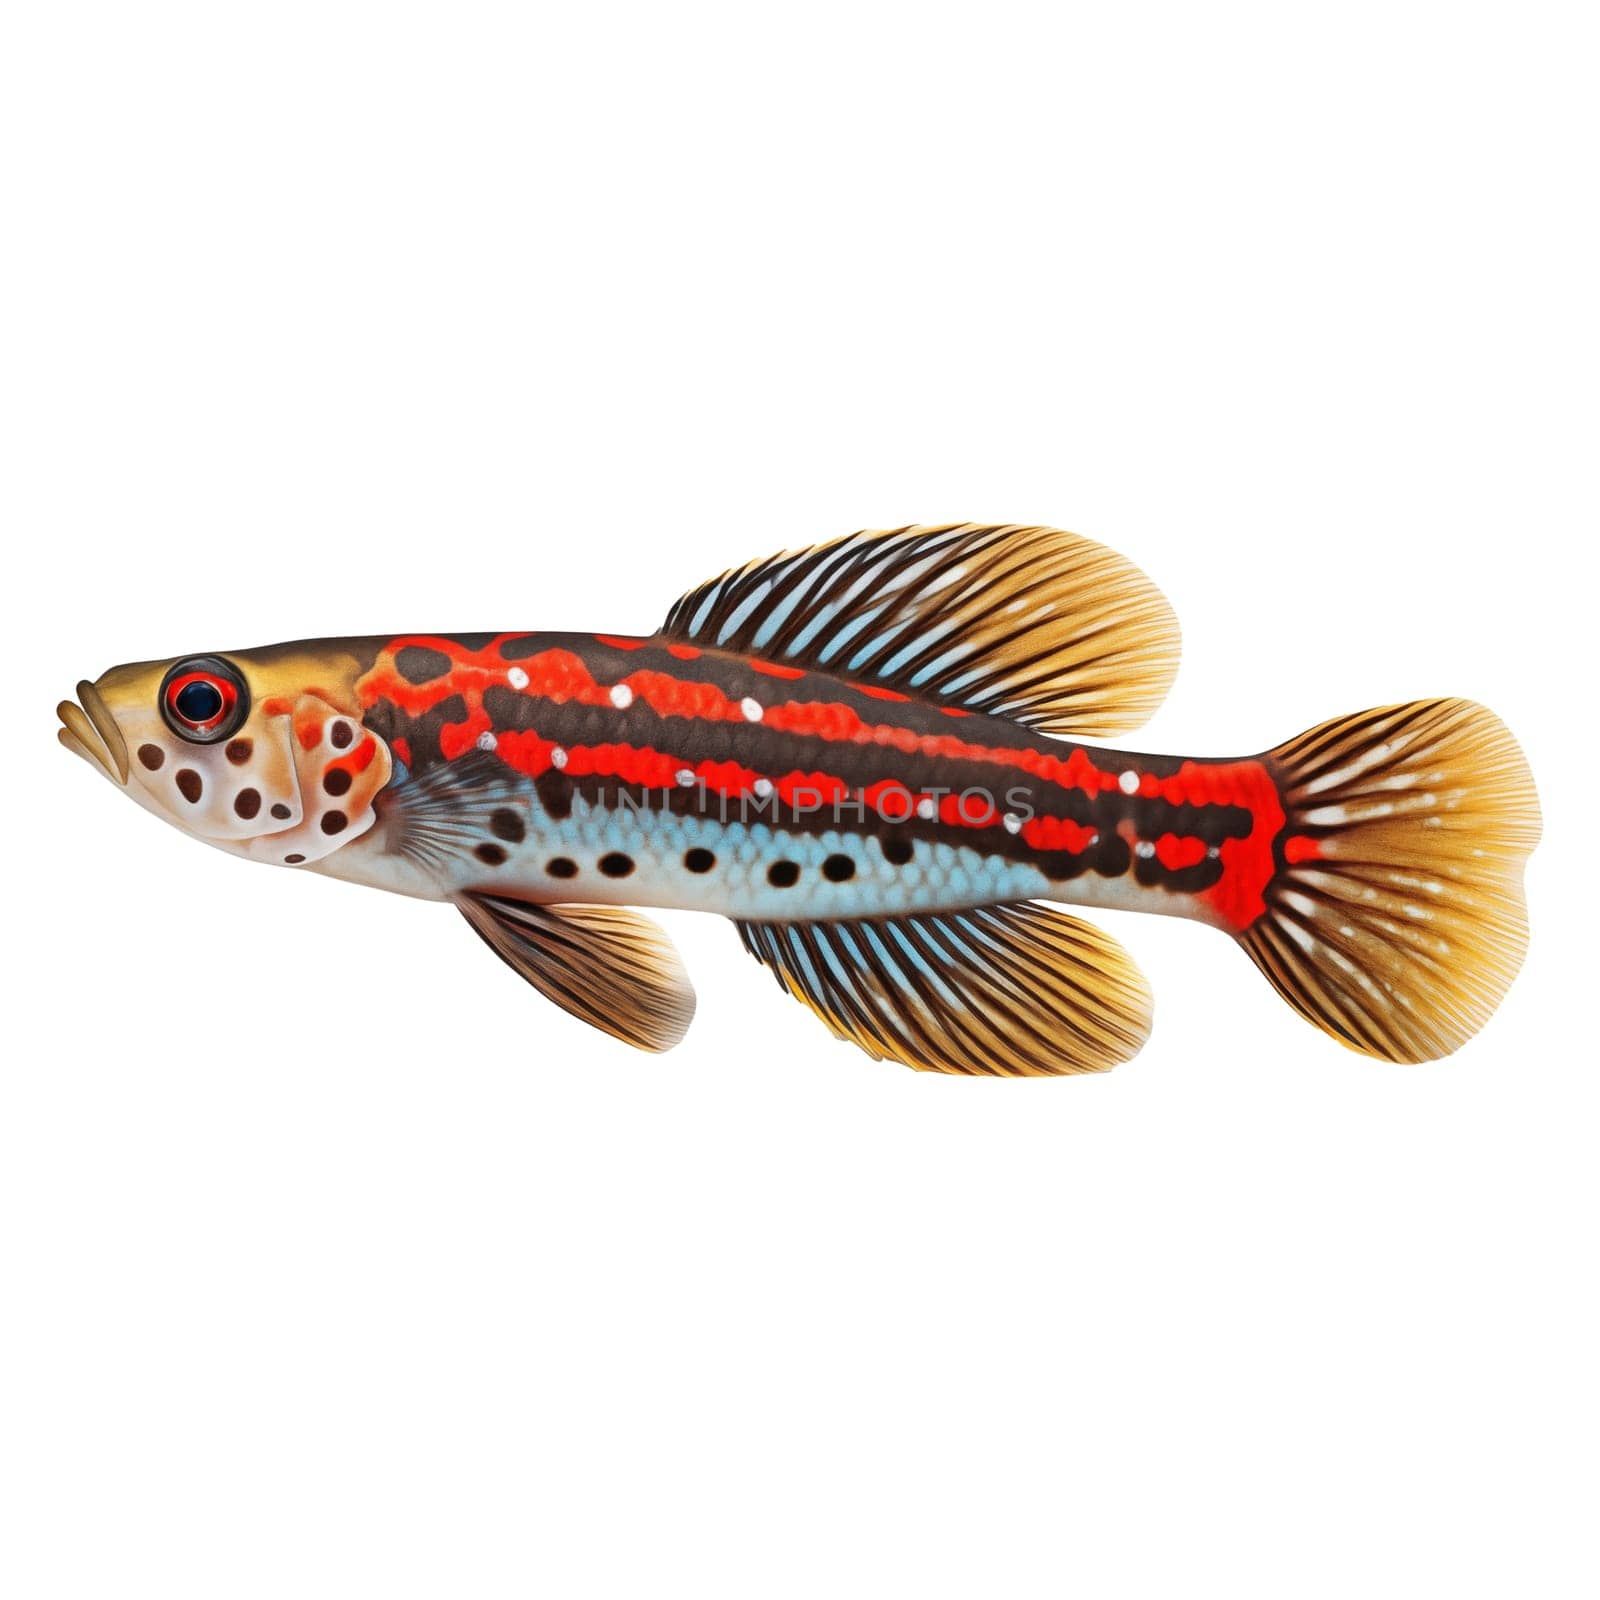 Multicolored aquarium fish on a transparent background, side view. The Firetail Goby, an red and blue saltwater aquarium fish, isolated on a white background, a design element for insertion.